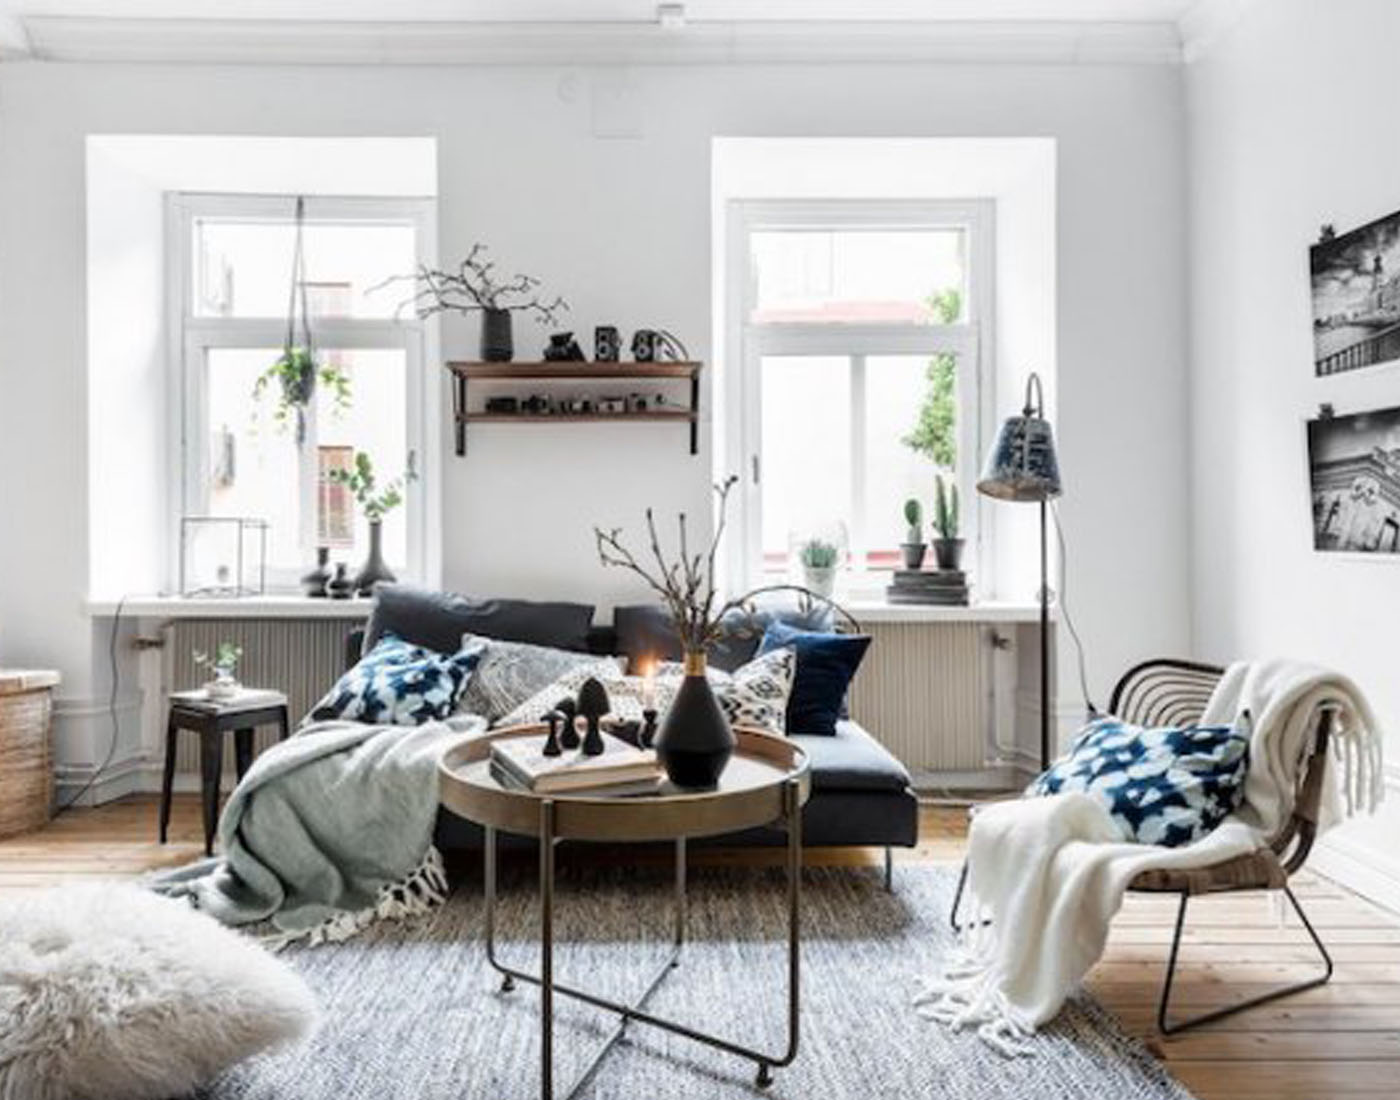 Cultivating Comfort: The Essentials Of Hygge In Home Design